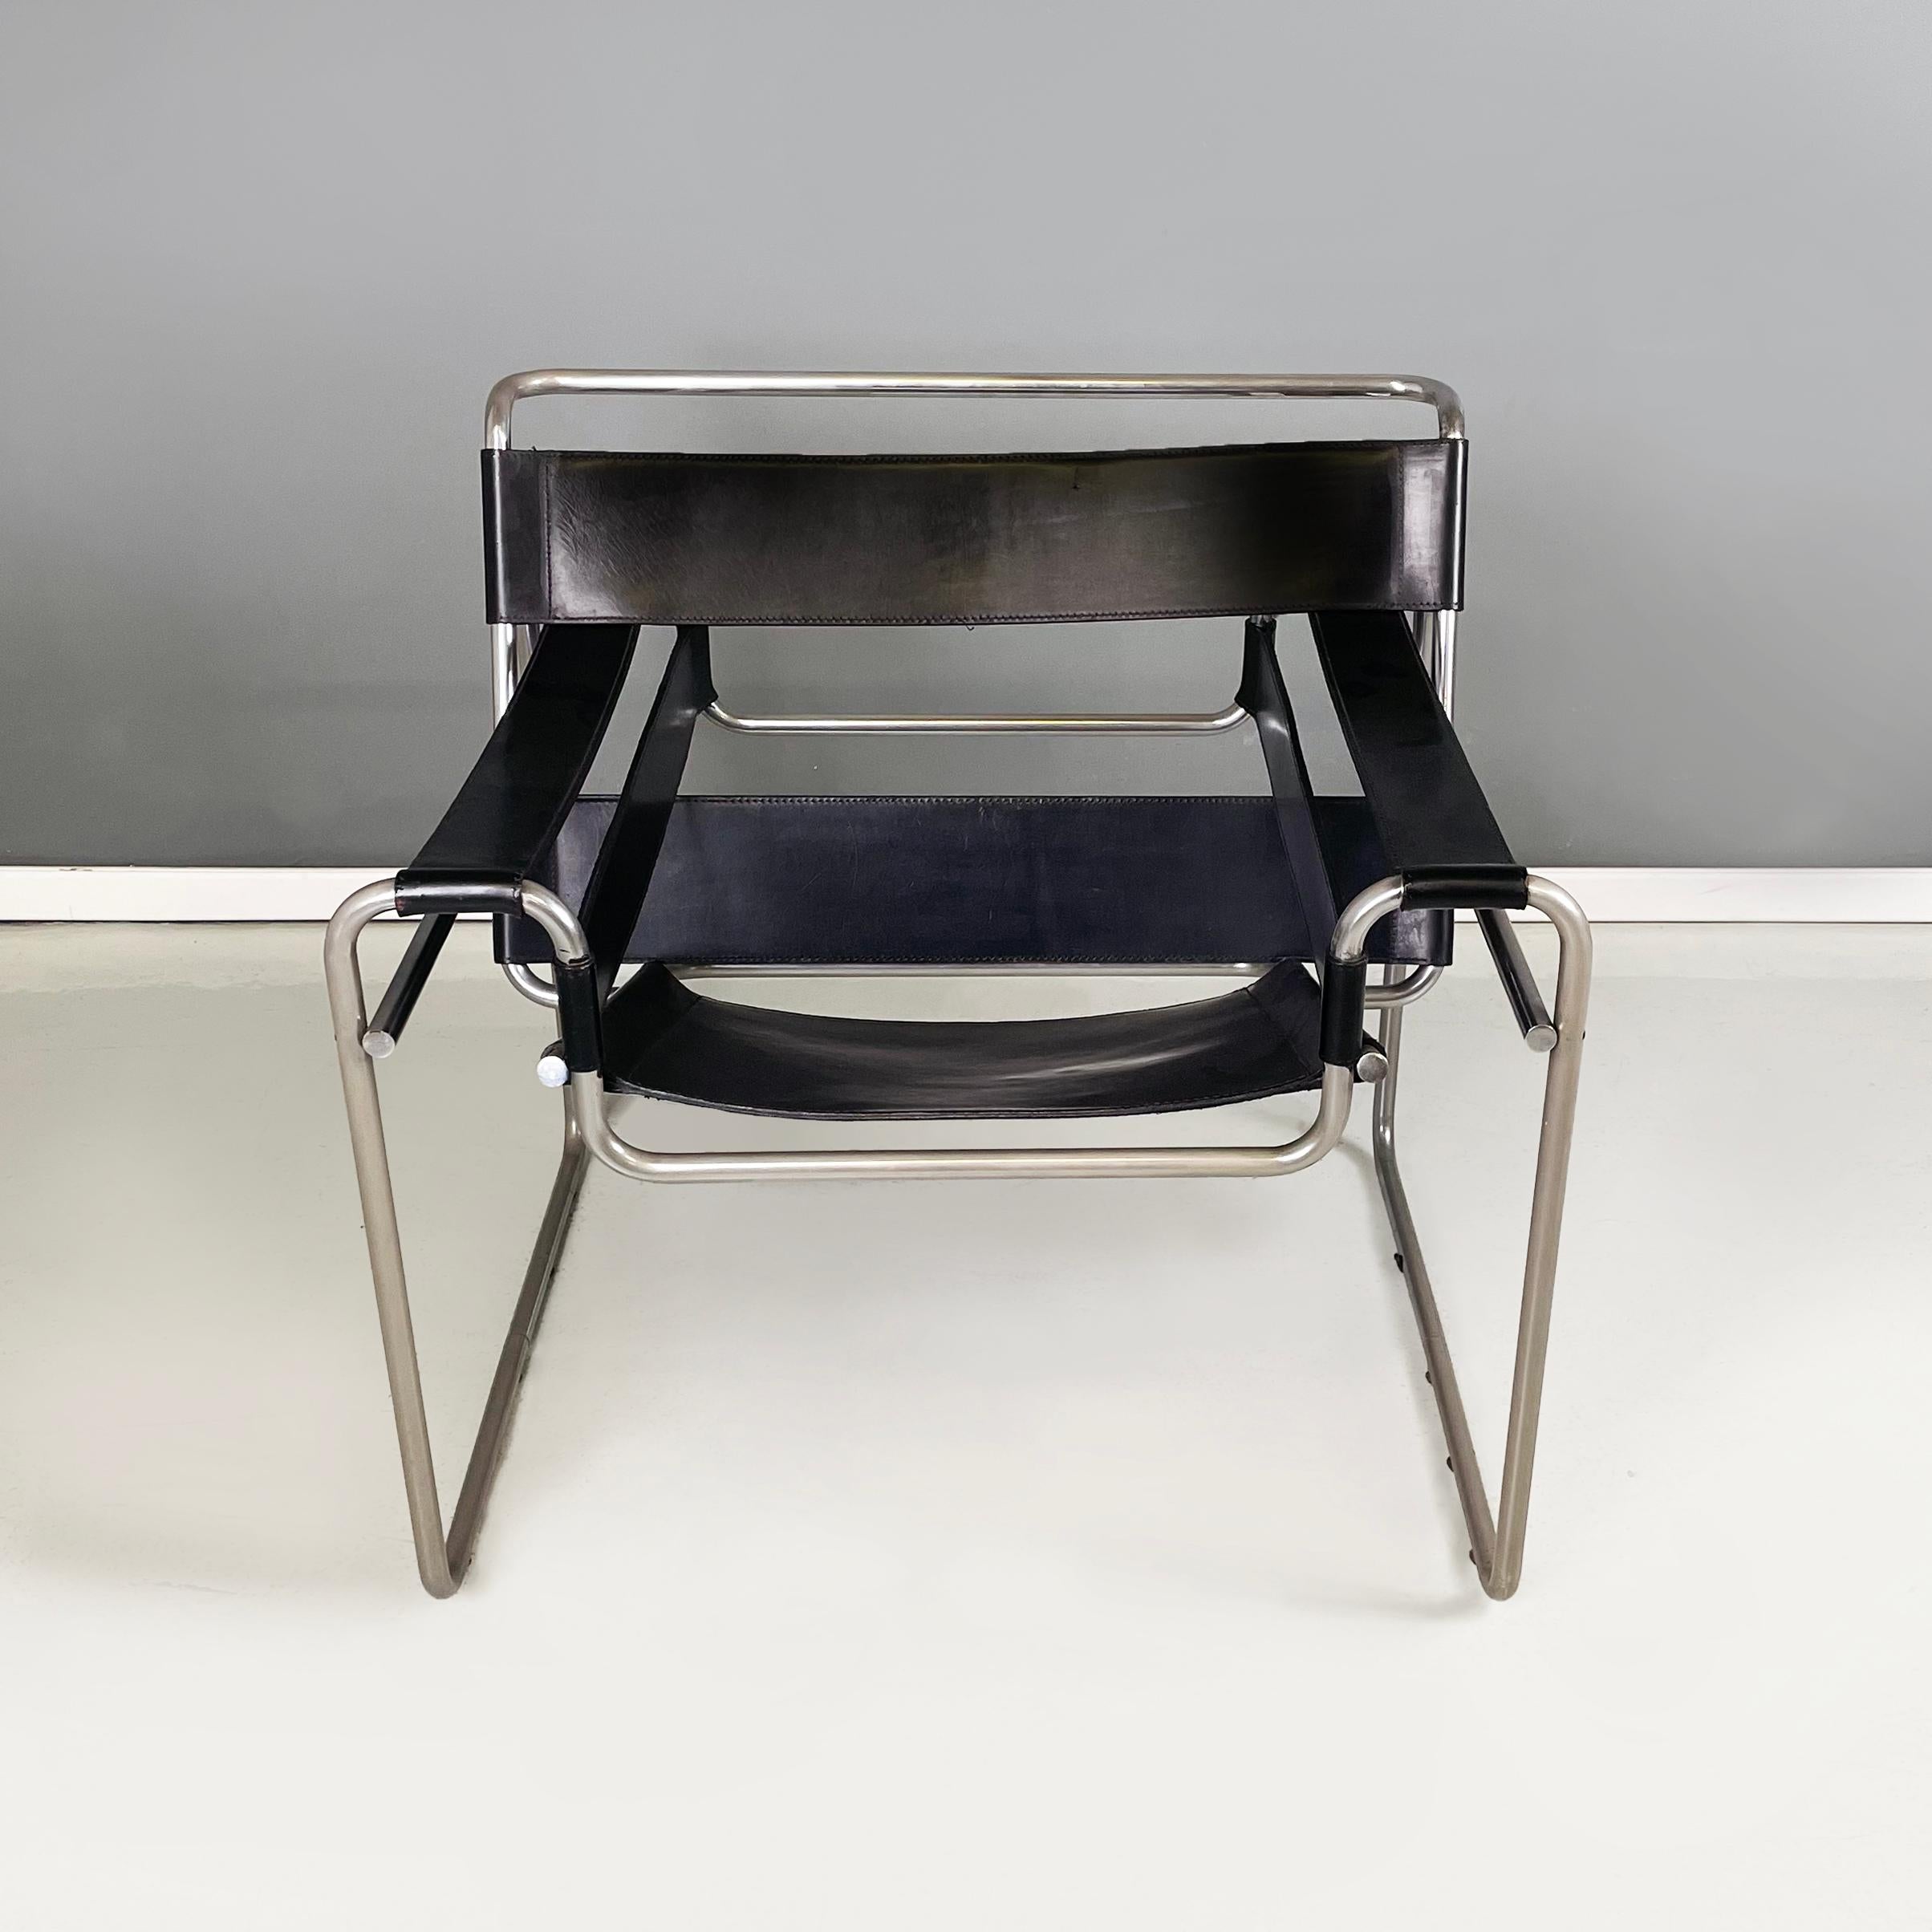 Italian modern Black leather and steel Armchair Wassily or B3 by Marcel Breuer for Gavina, 1980s
Iconic and vintage armchair mod. Wassily or B3, with chromed tubular steel structure The seat, armrests and backrest are made up of bands entirely in